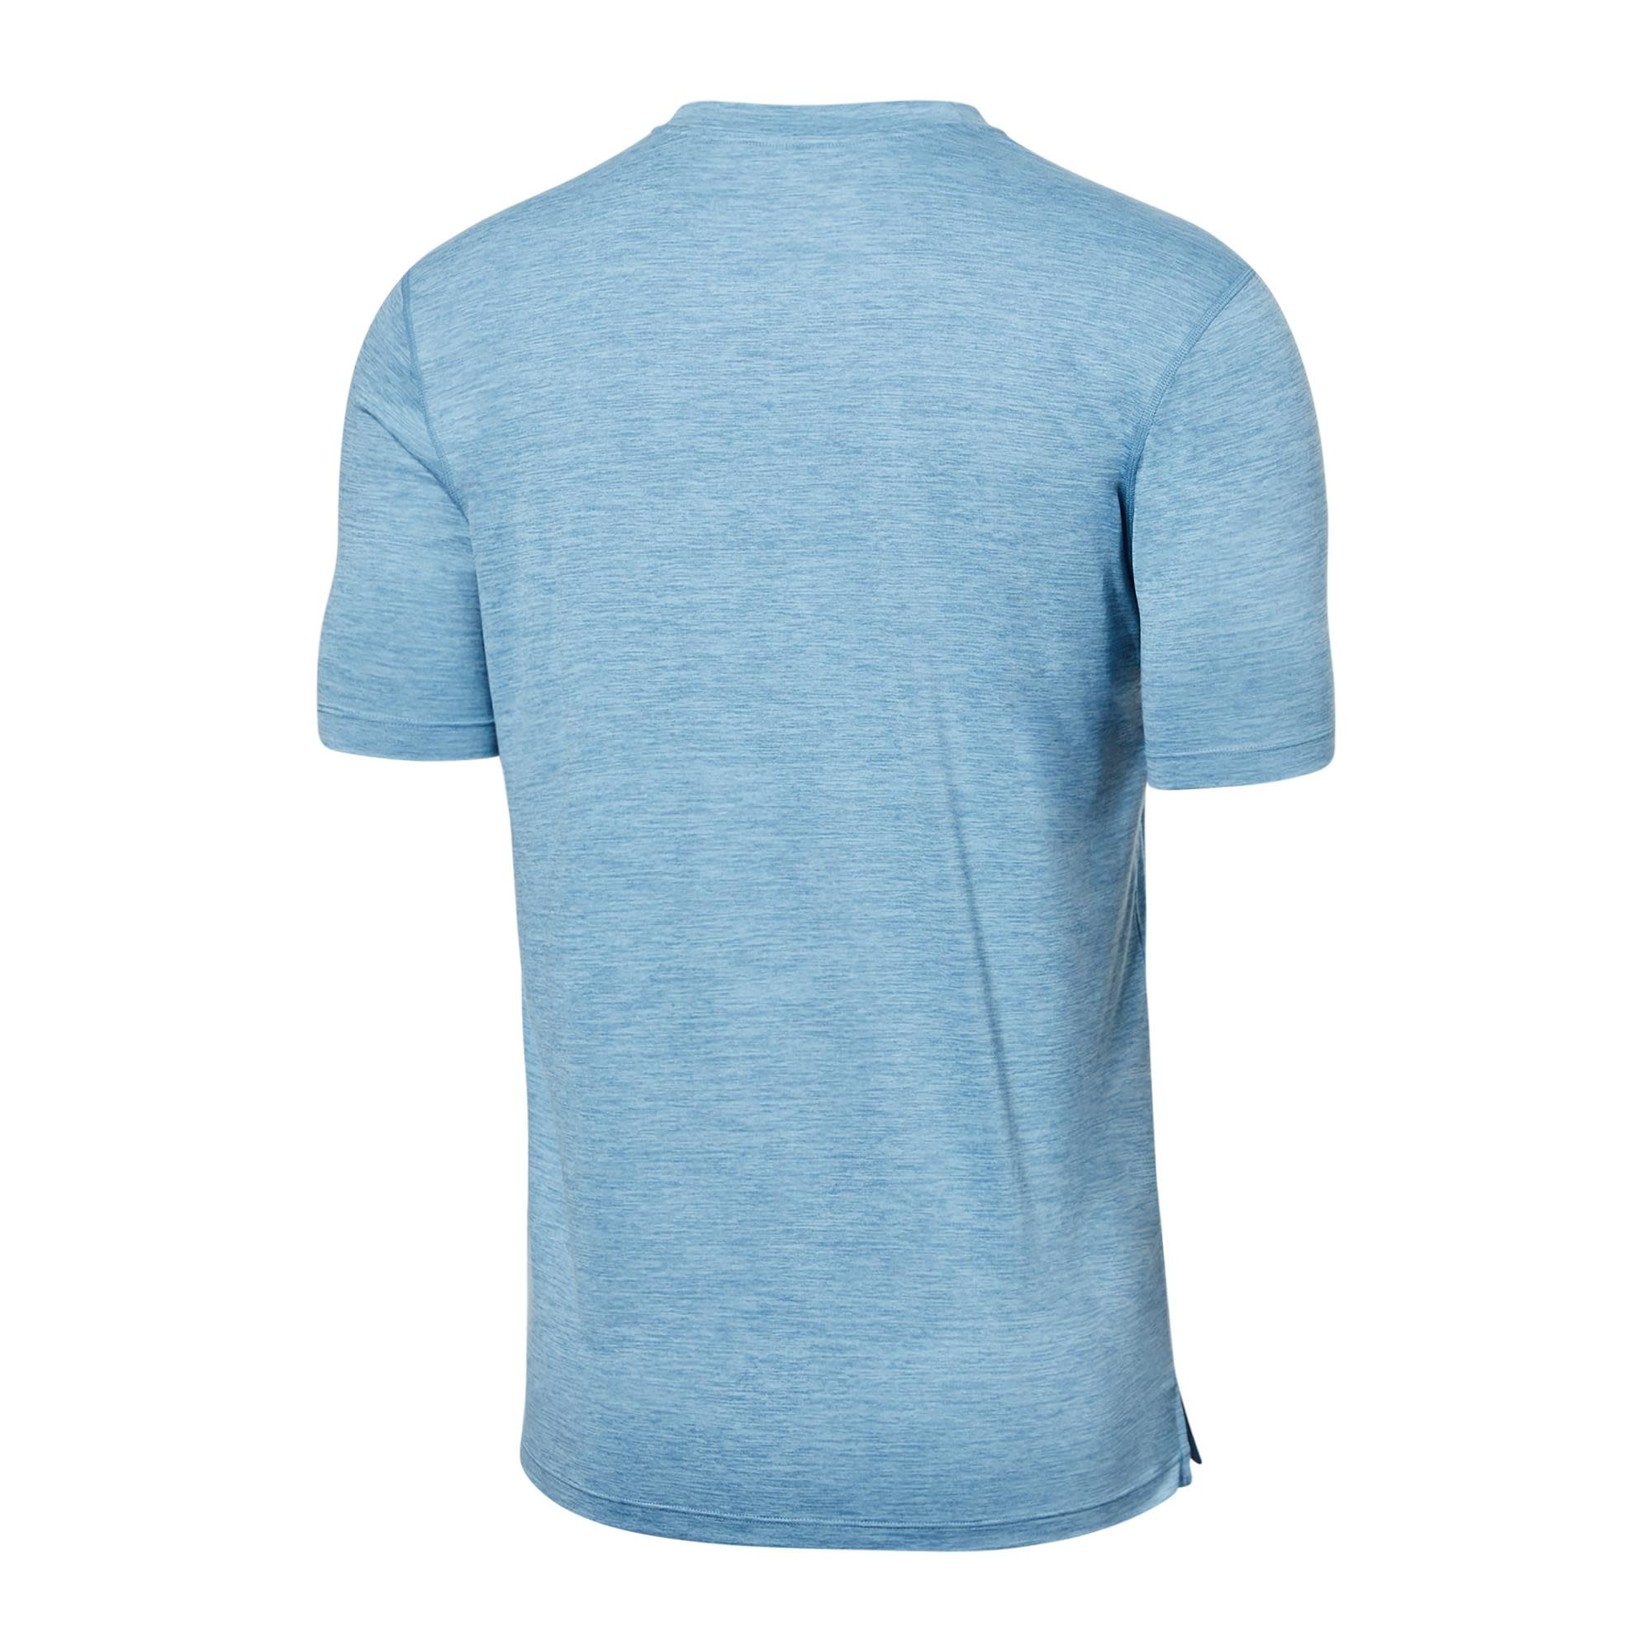 SAXX DROPTEMP™ ALL DAY COOLING Short Sleeve Crew Pocket Tee